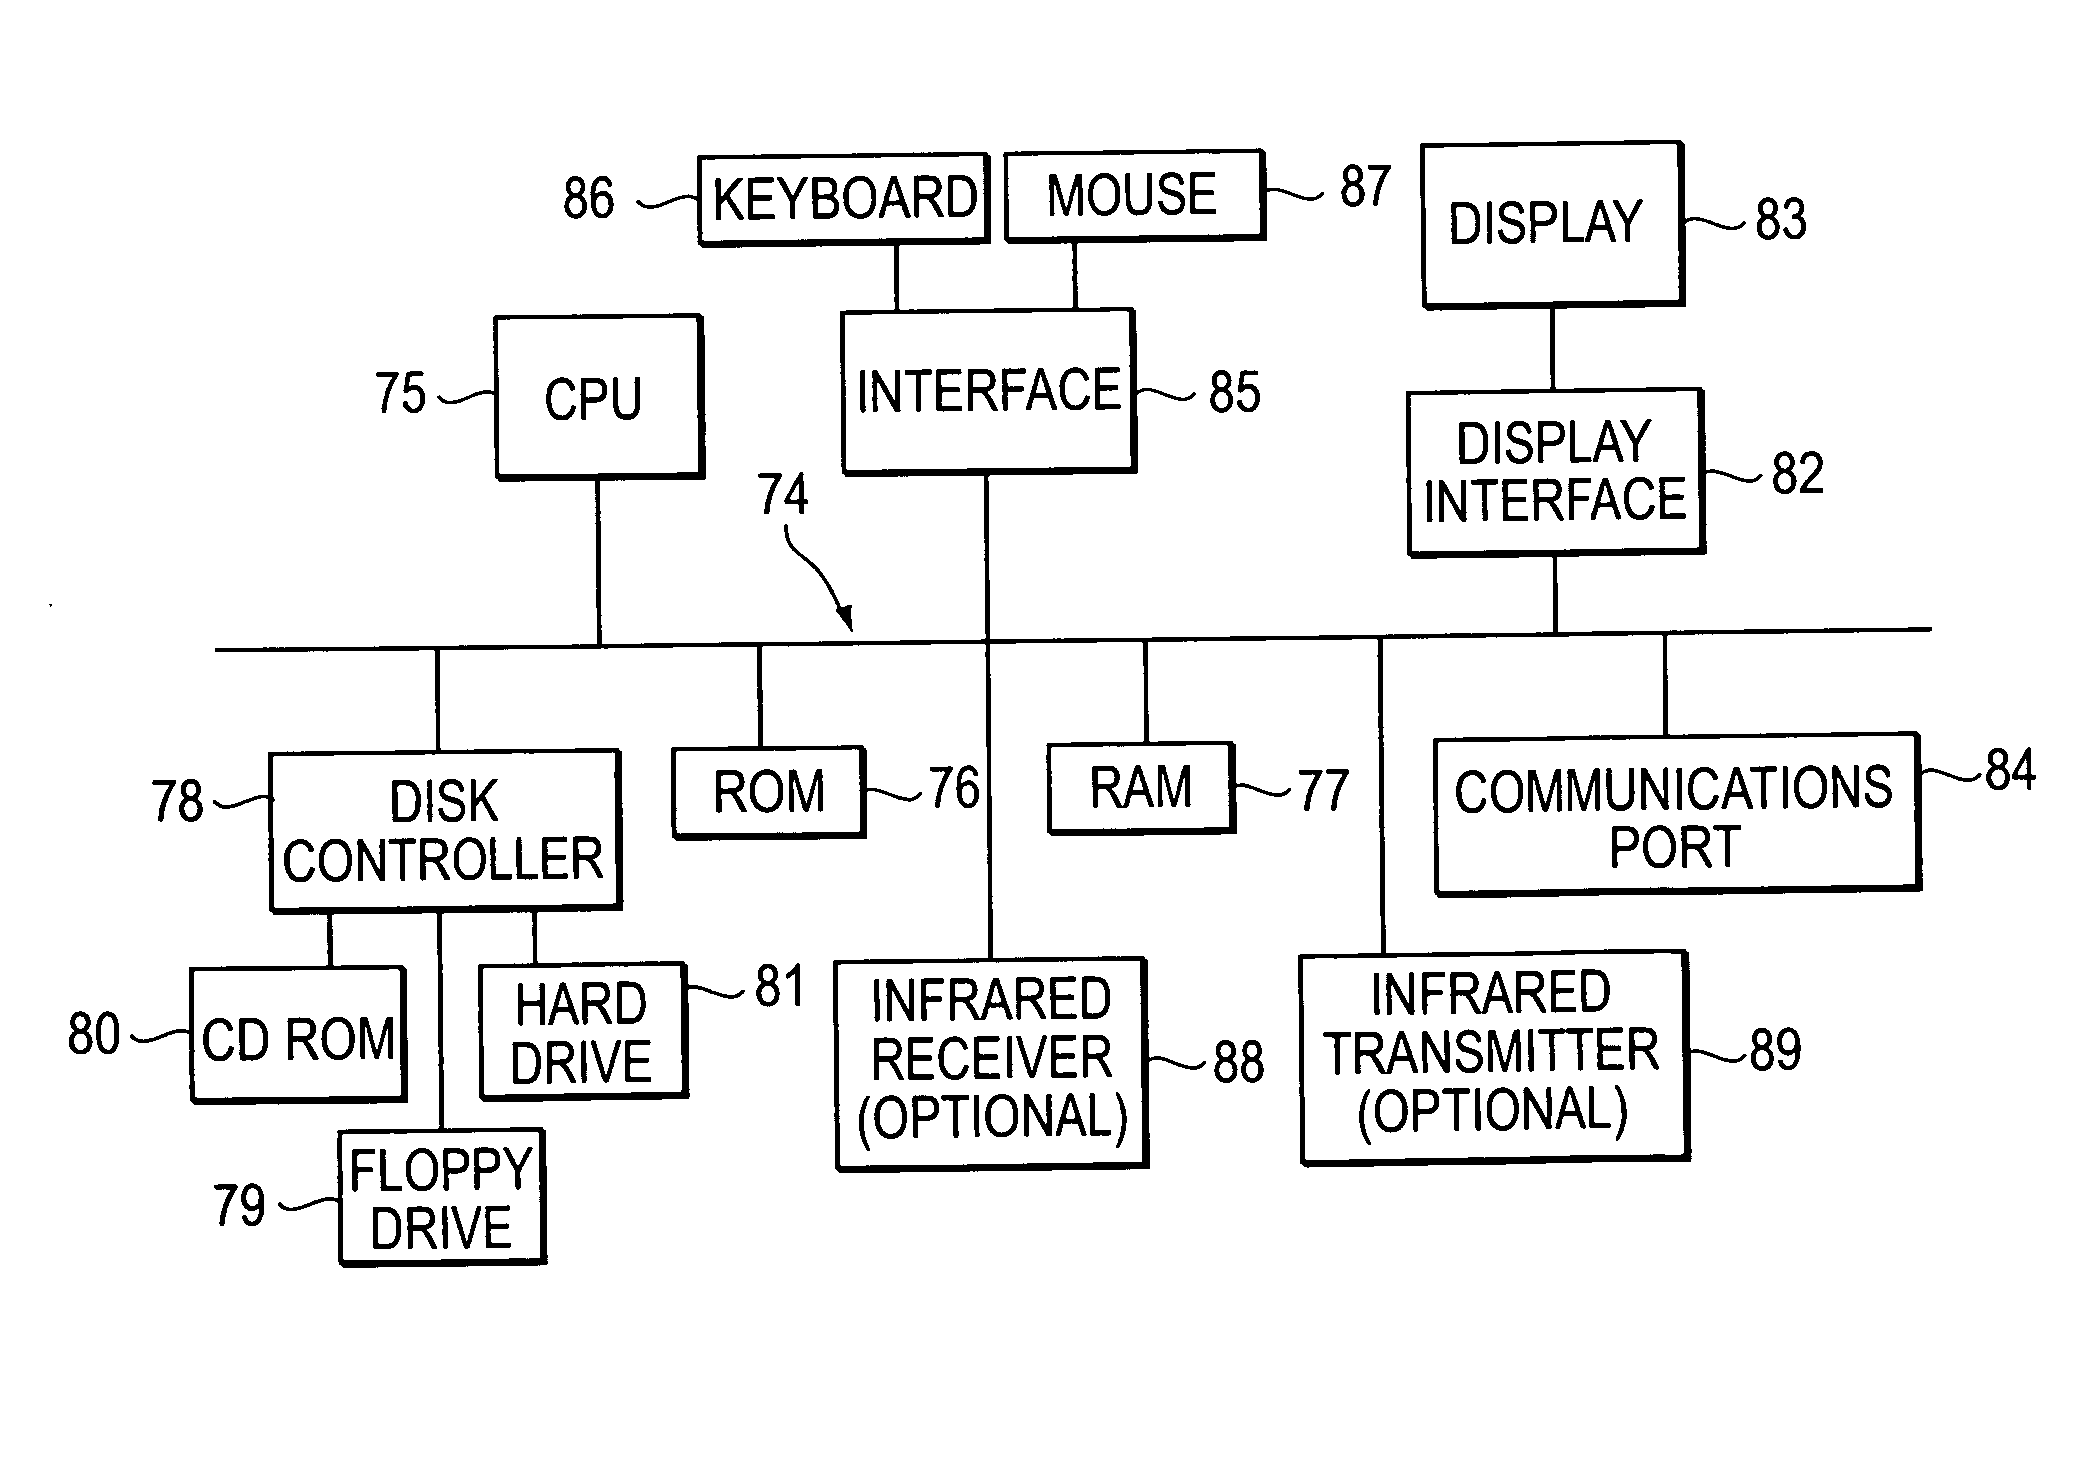 Computer system and method for generating healthcare risk indices using medical claims information